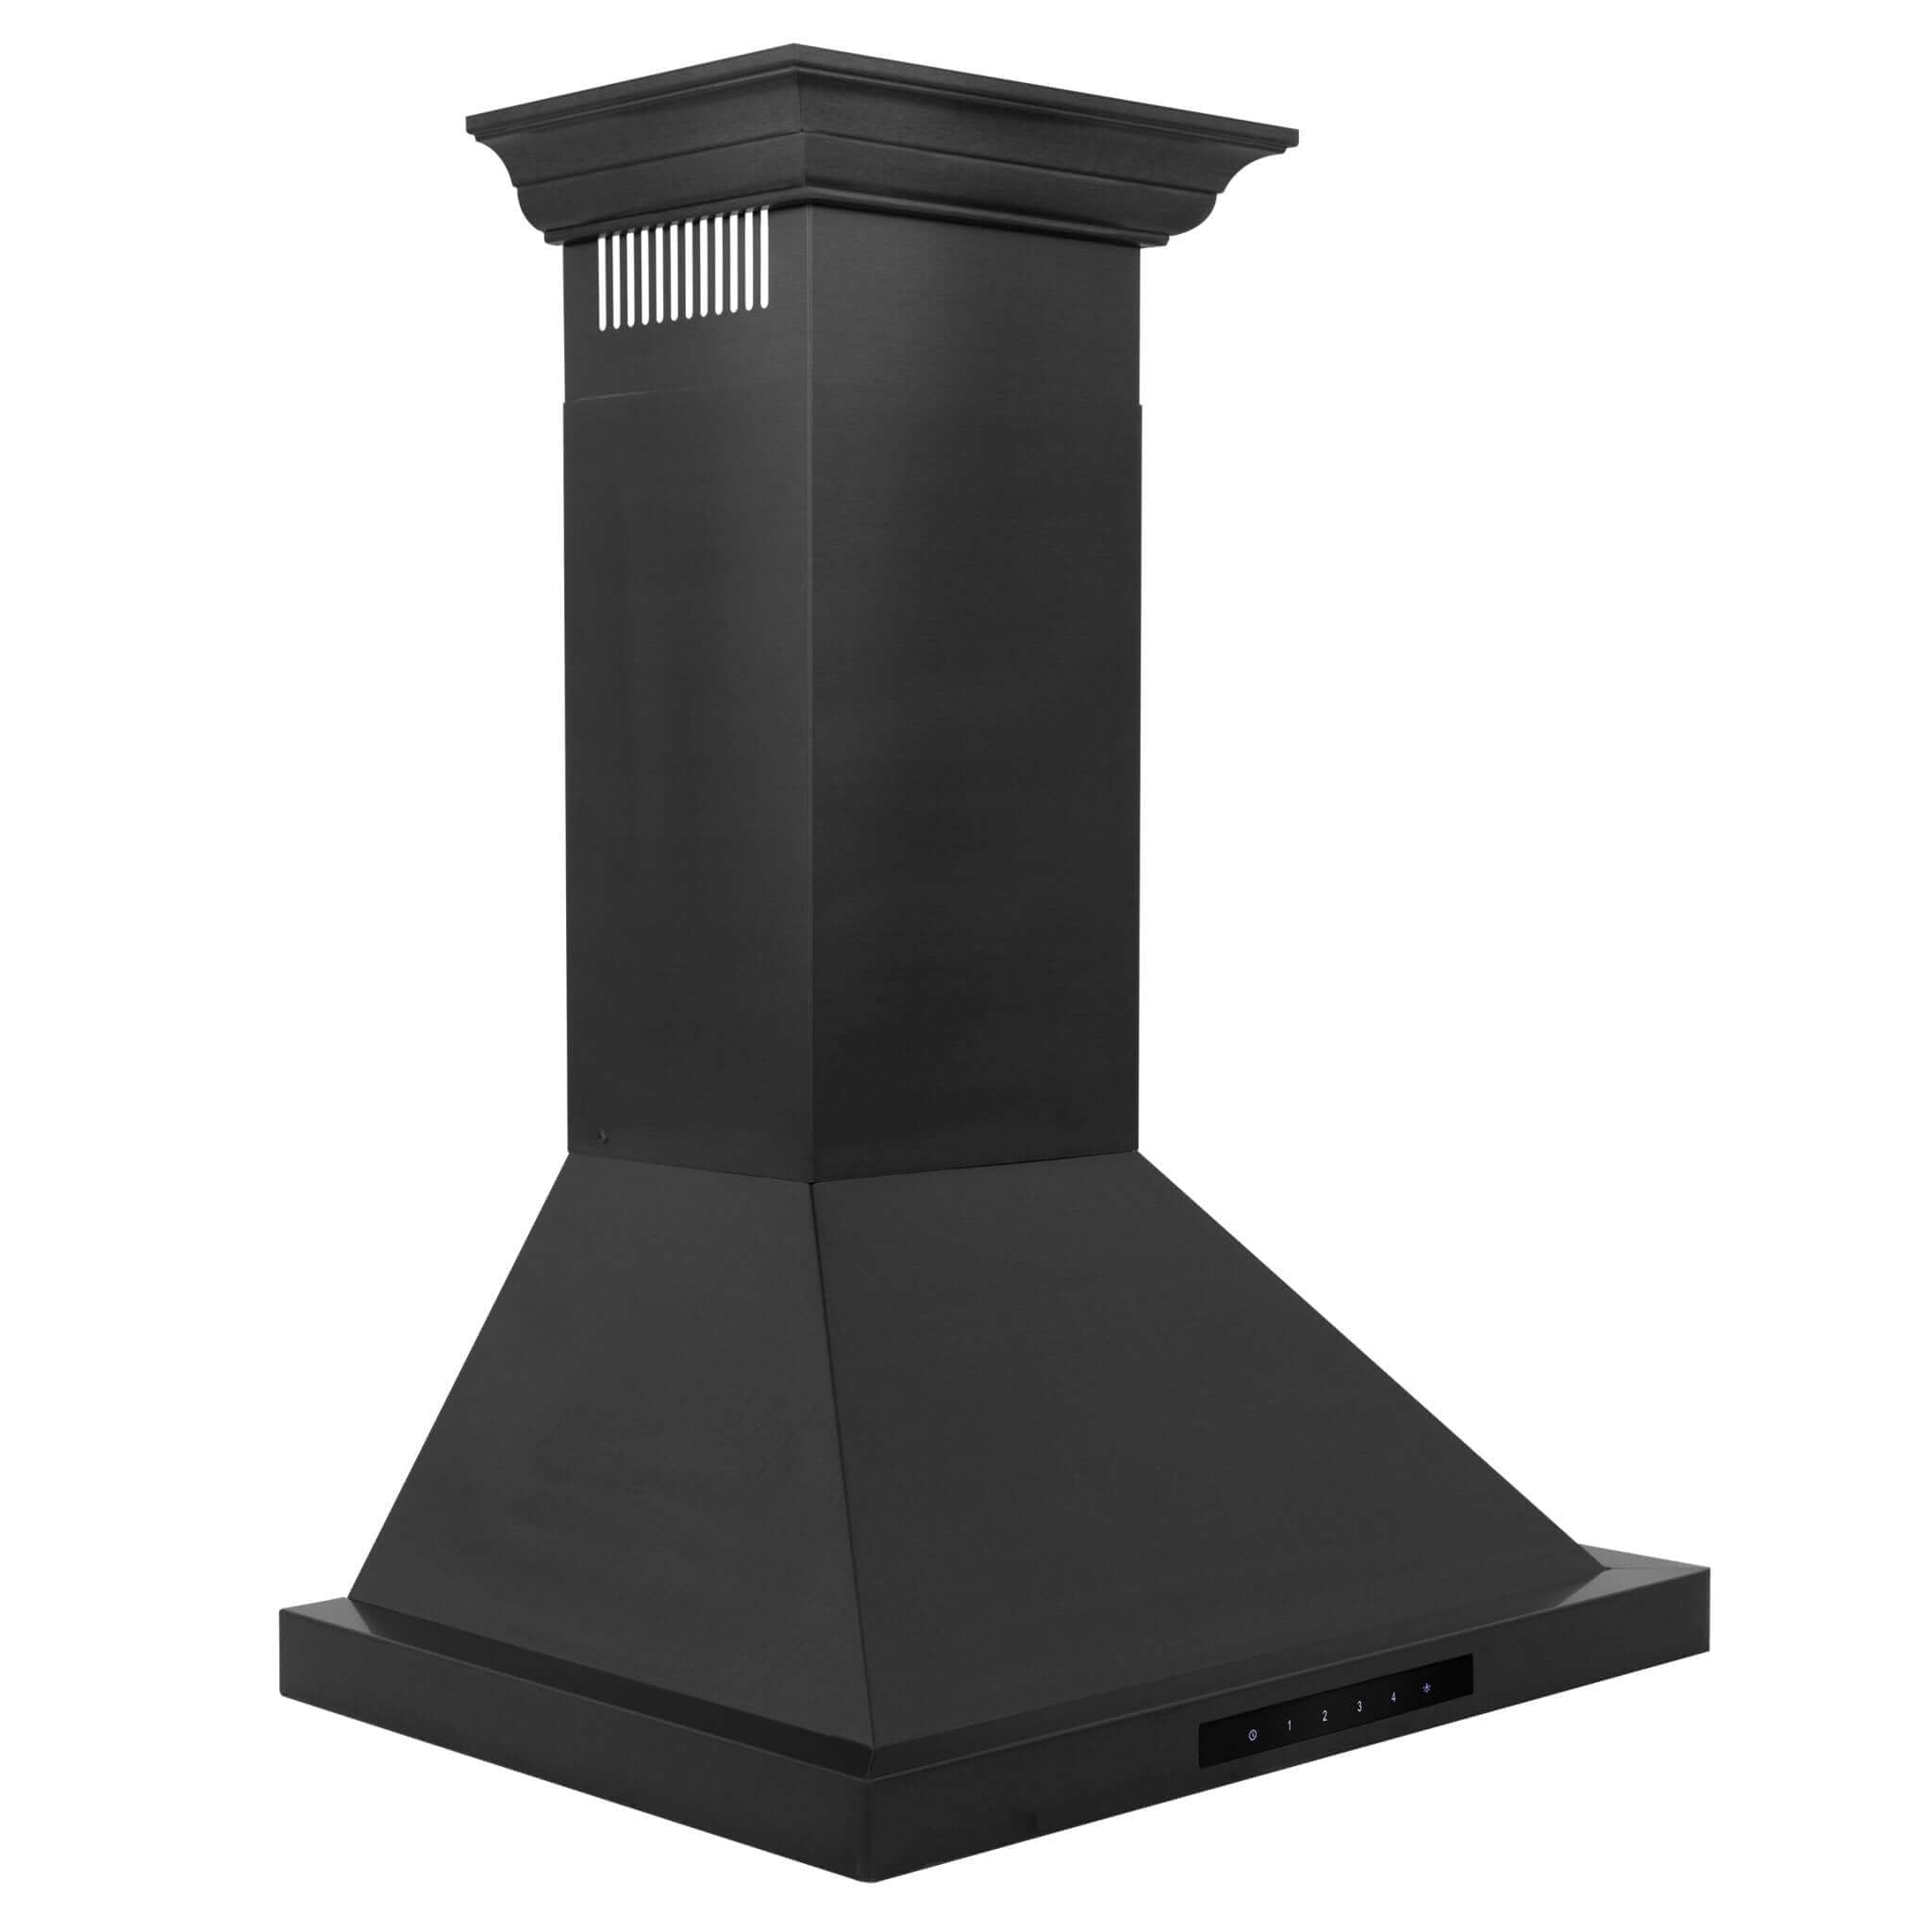 ZLINE Convertible Vent Wall Mount Range Hood in Black Stainless Steel with Crown Molding (BSKBNCRN) side